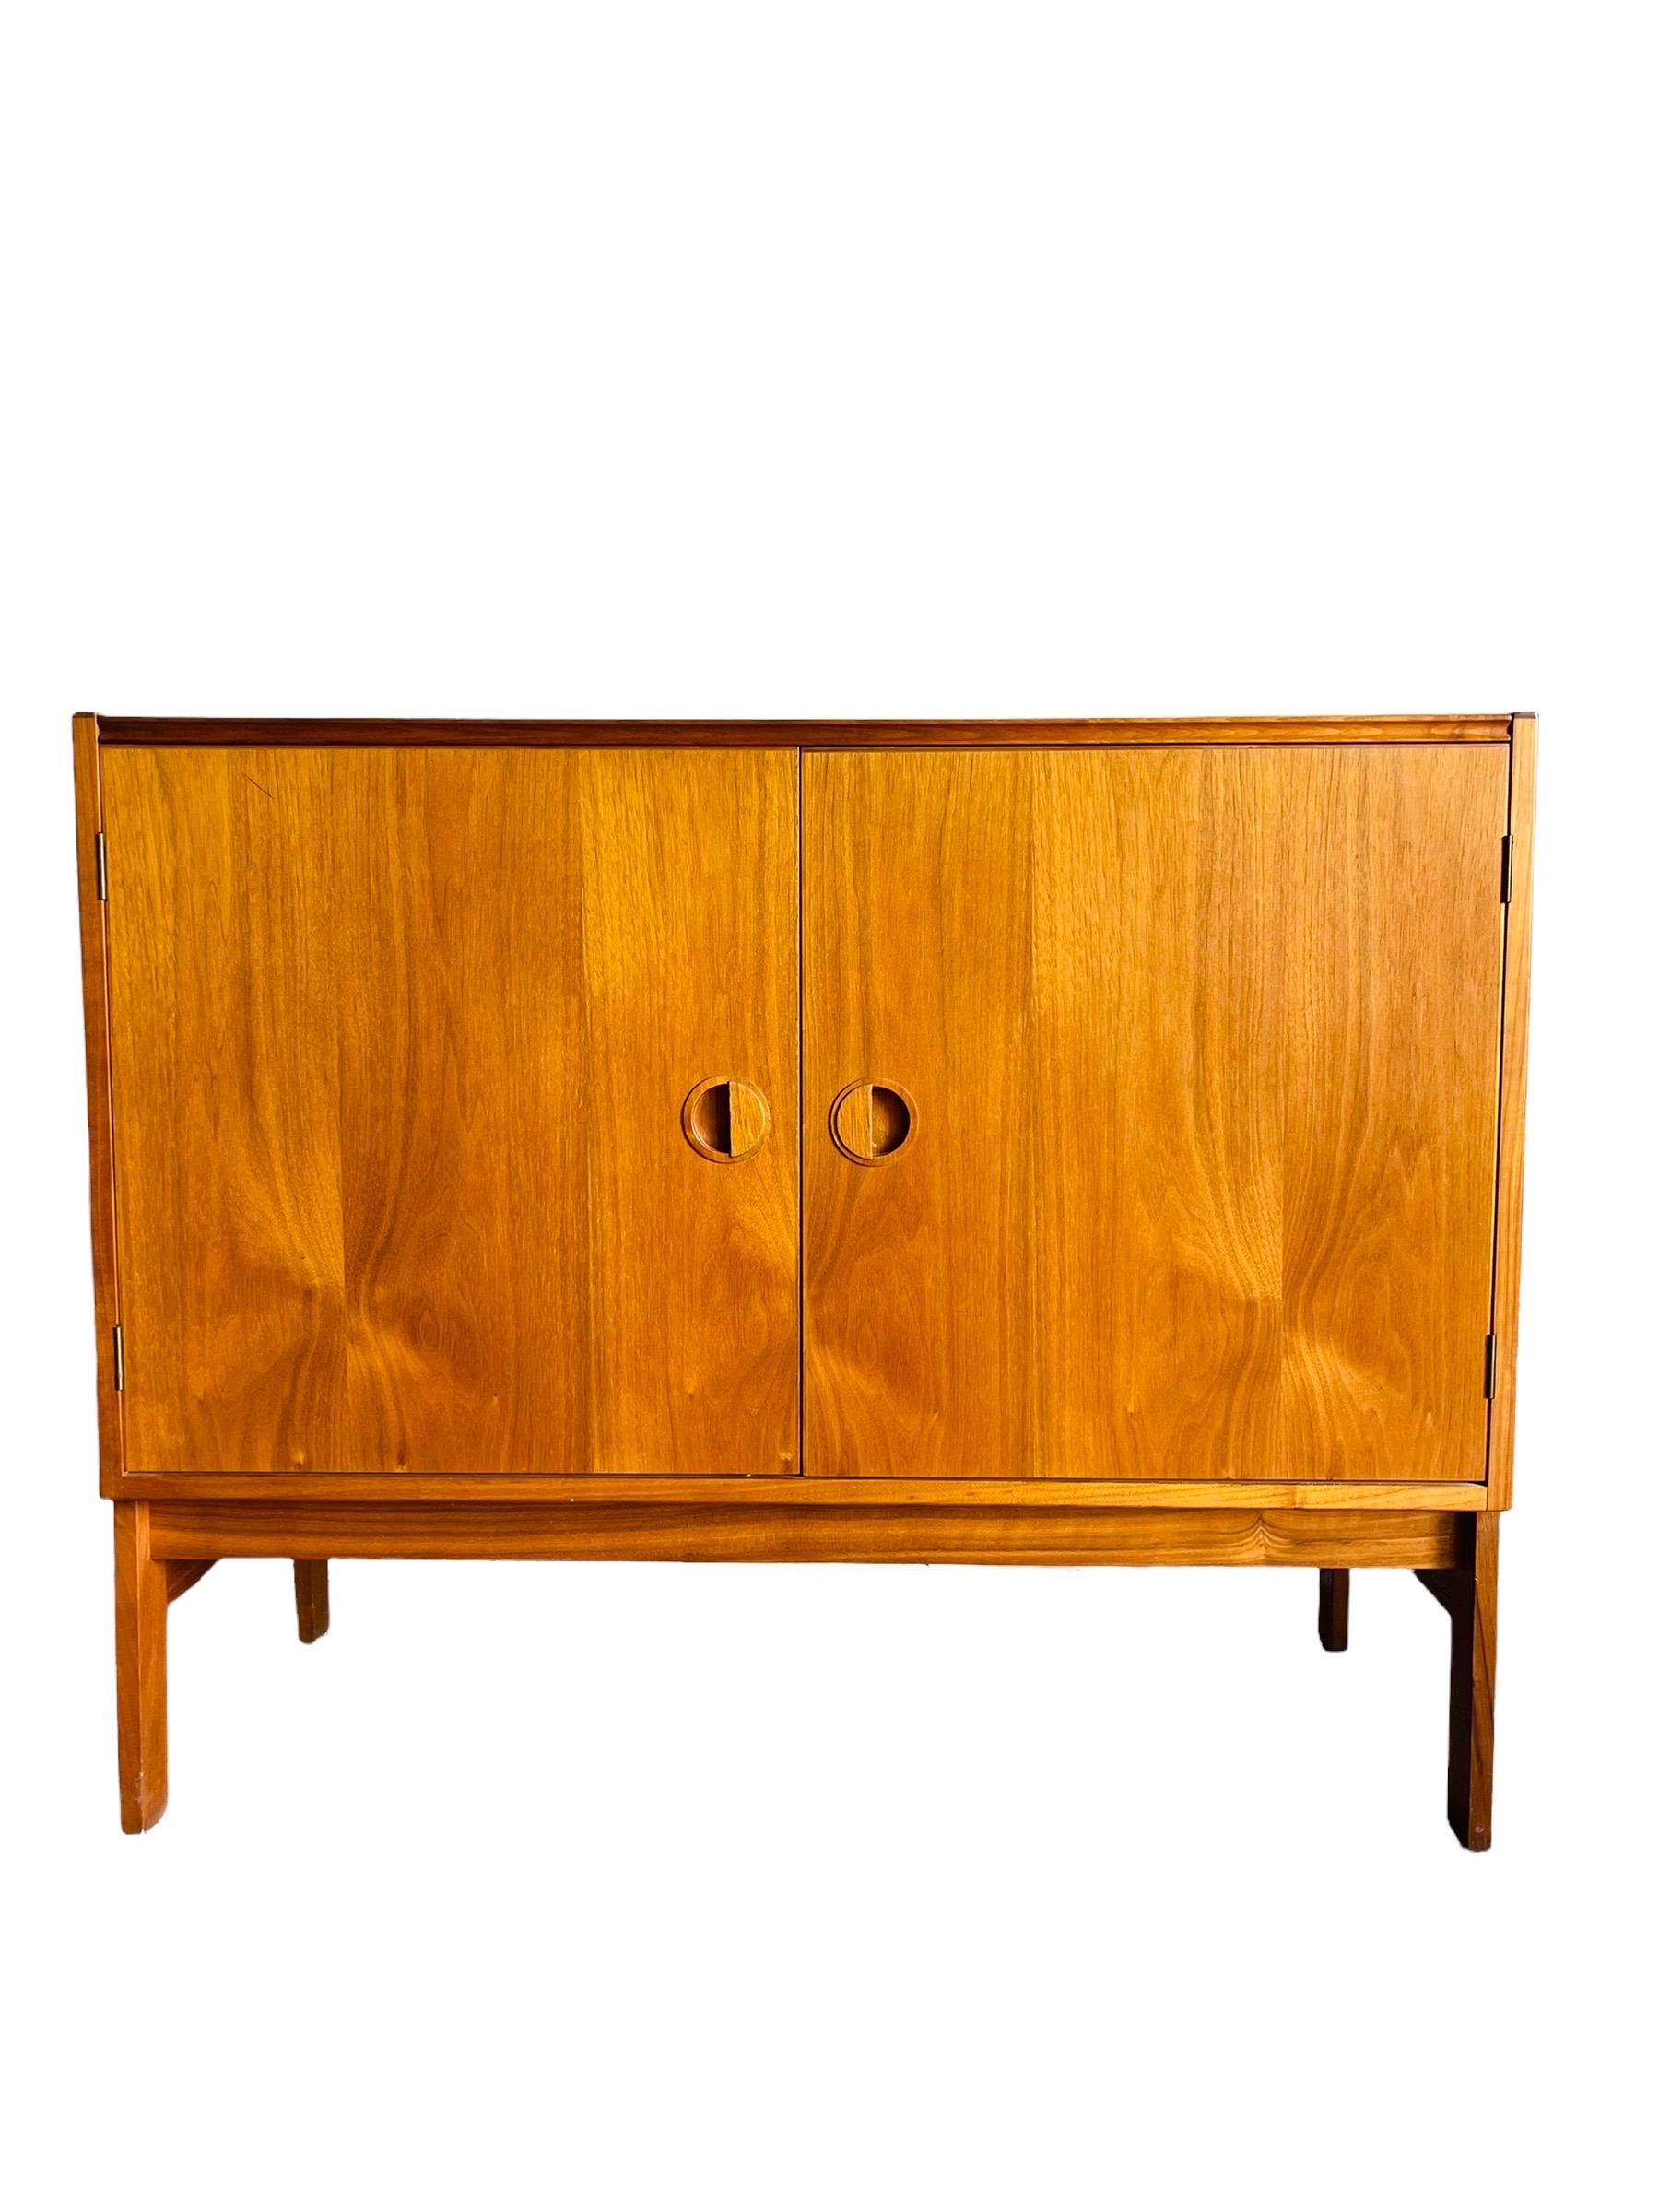 Beautiful Danish modern teak record cabinet by Hansen Guldborg of Denmark. This cabinet is equipped with two doors to open to multiple adjustable shelves and a lift up door on top for easy access to a record player. This versatile cabinet can be